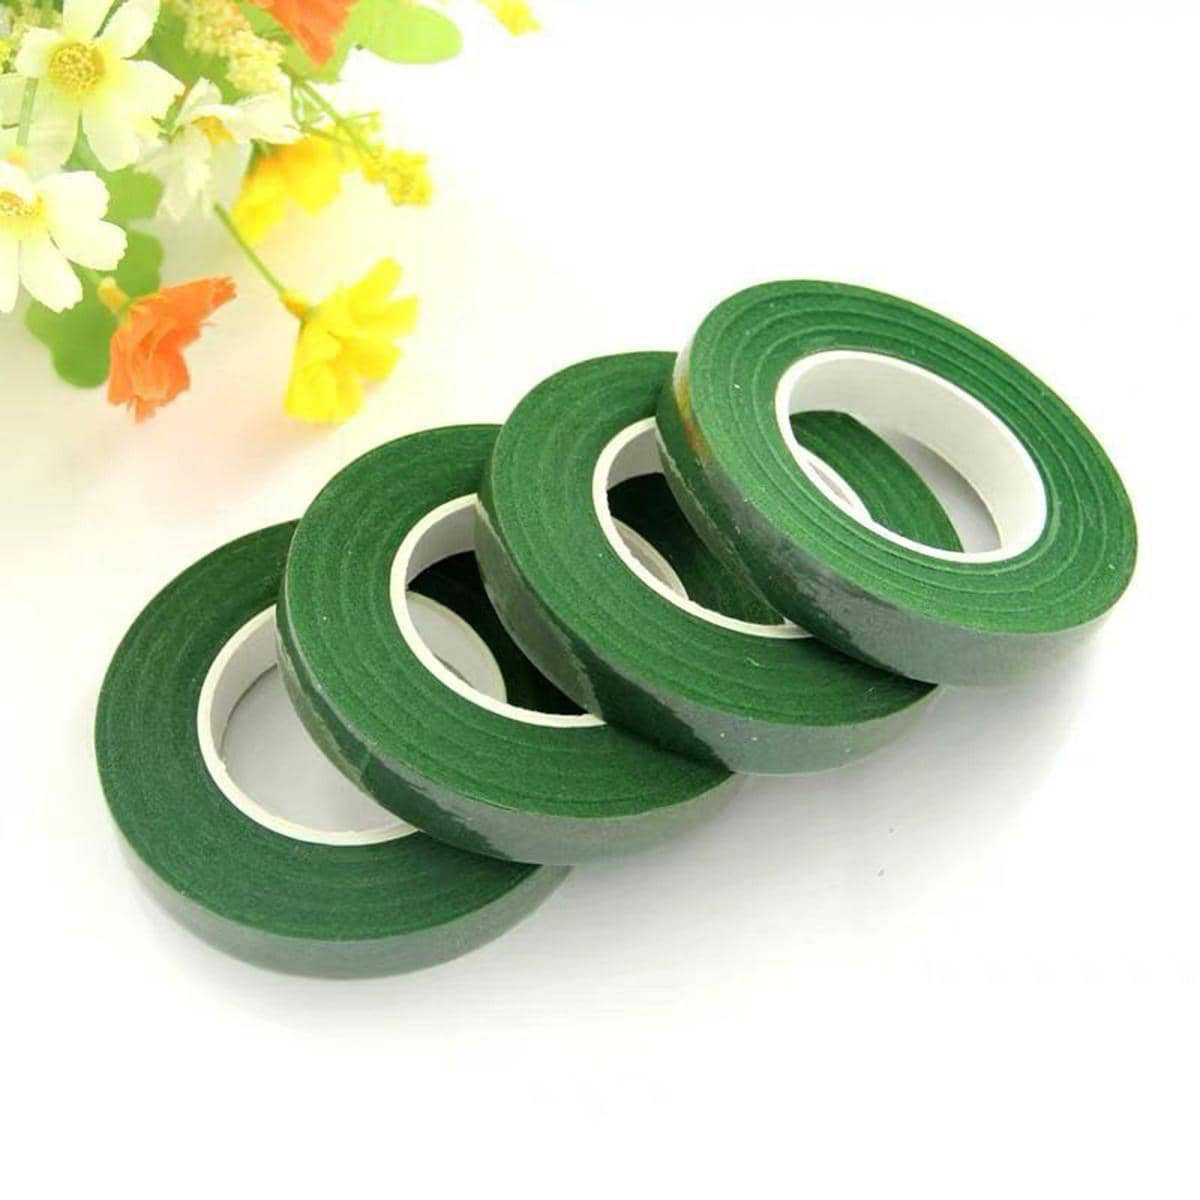 Floral Tape & Green Tape For Diy Flower Arrangements Including Flower Stems  Binding Tape And Bordering Tape For Bouquets Decoration, Flower Shop  Packaging Material